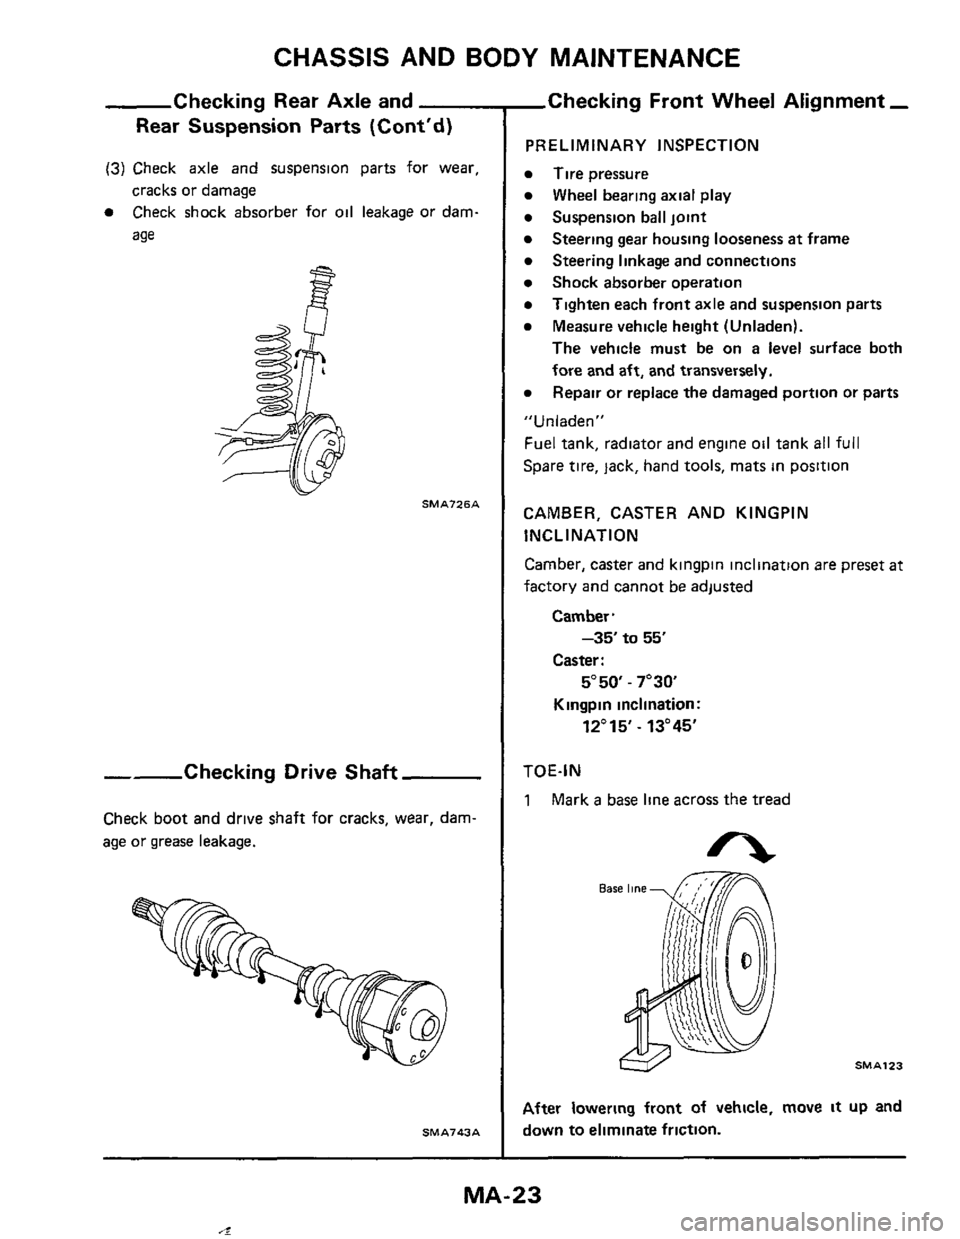 NISSAN 300ZX 1984 Z31 Maintenance User Guide CHASSIS AND BODY MAINTENANCE 
Checking  Rear Axle and 
Rear  Suspension  Parts (Contd) 
(3) Check  axle and suspension  parts for wear, 
cracks  or damage 
0 Check  shock absorber  for oil leakage or